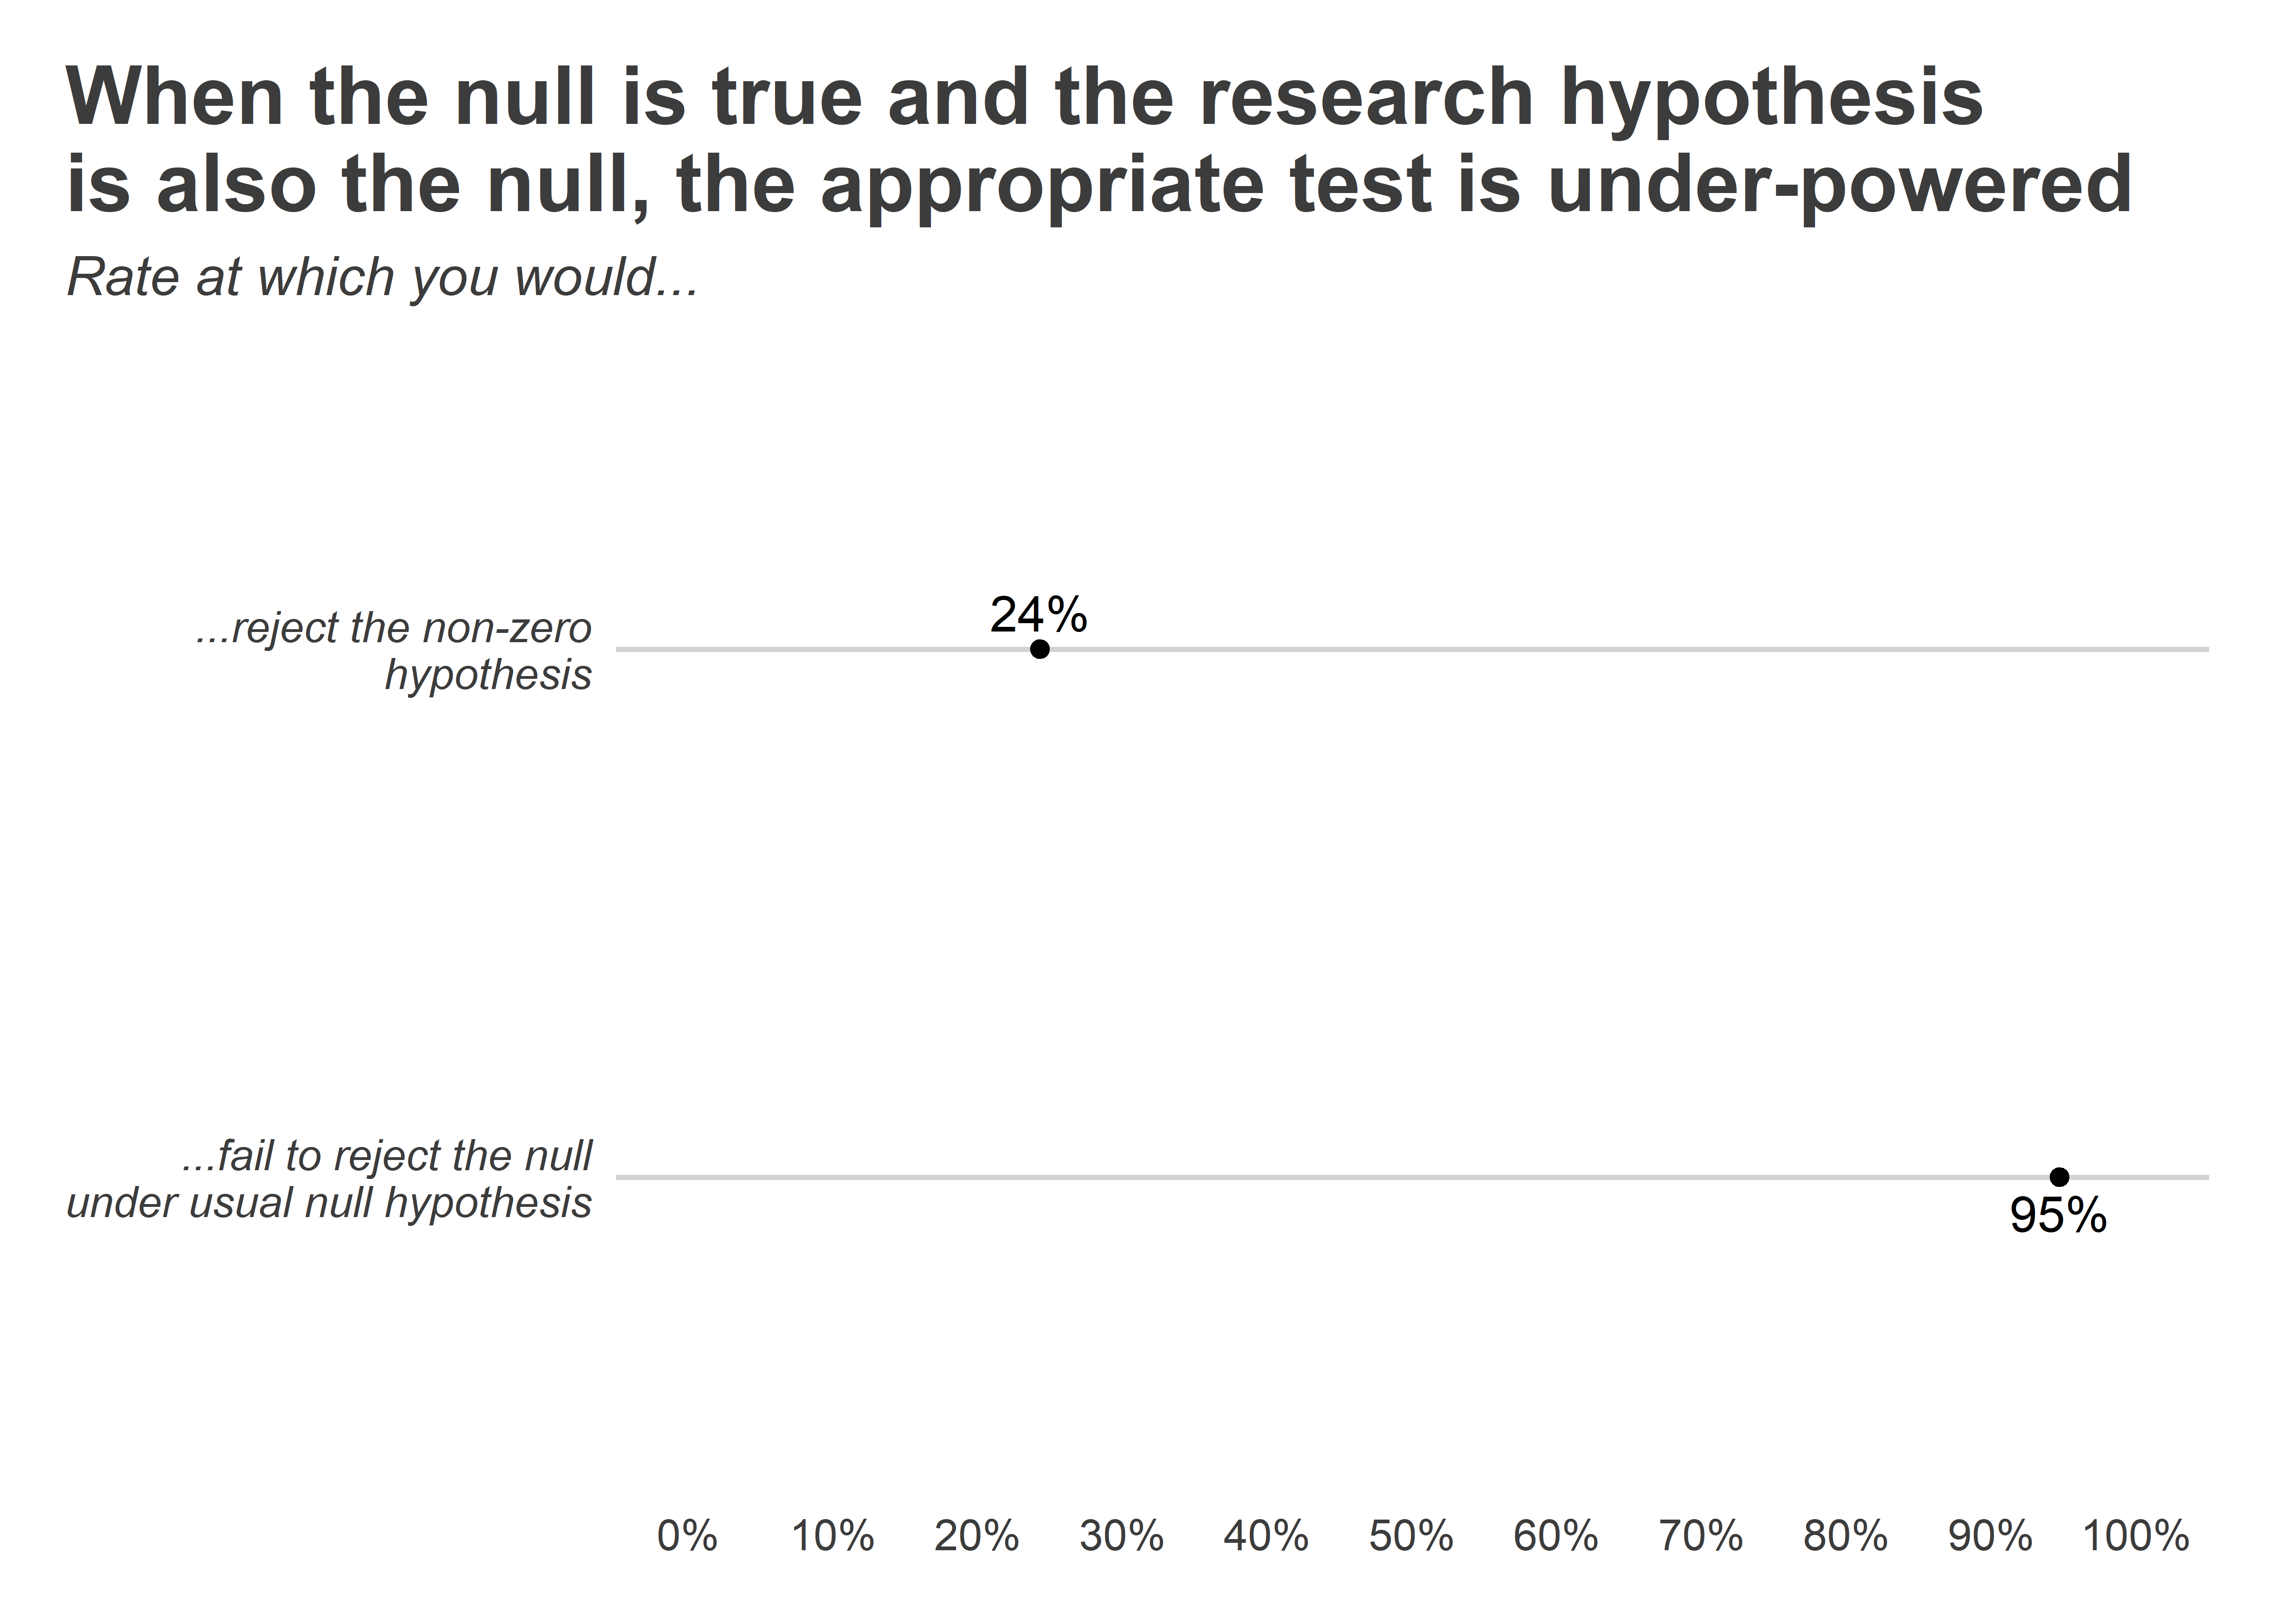 what null hypothesis do